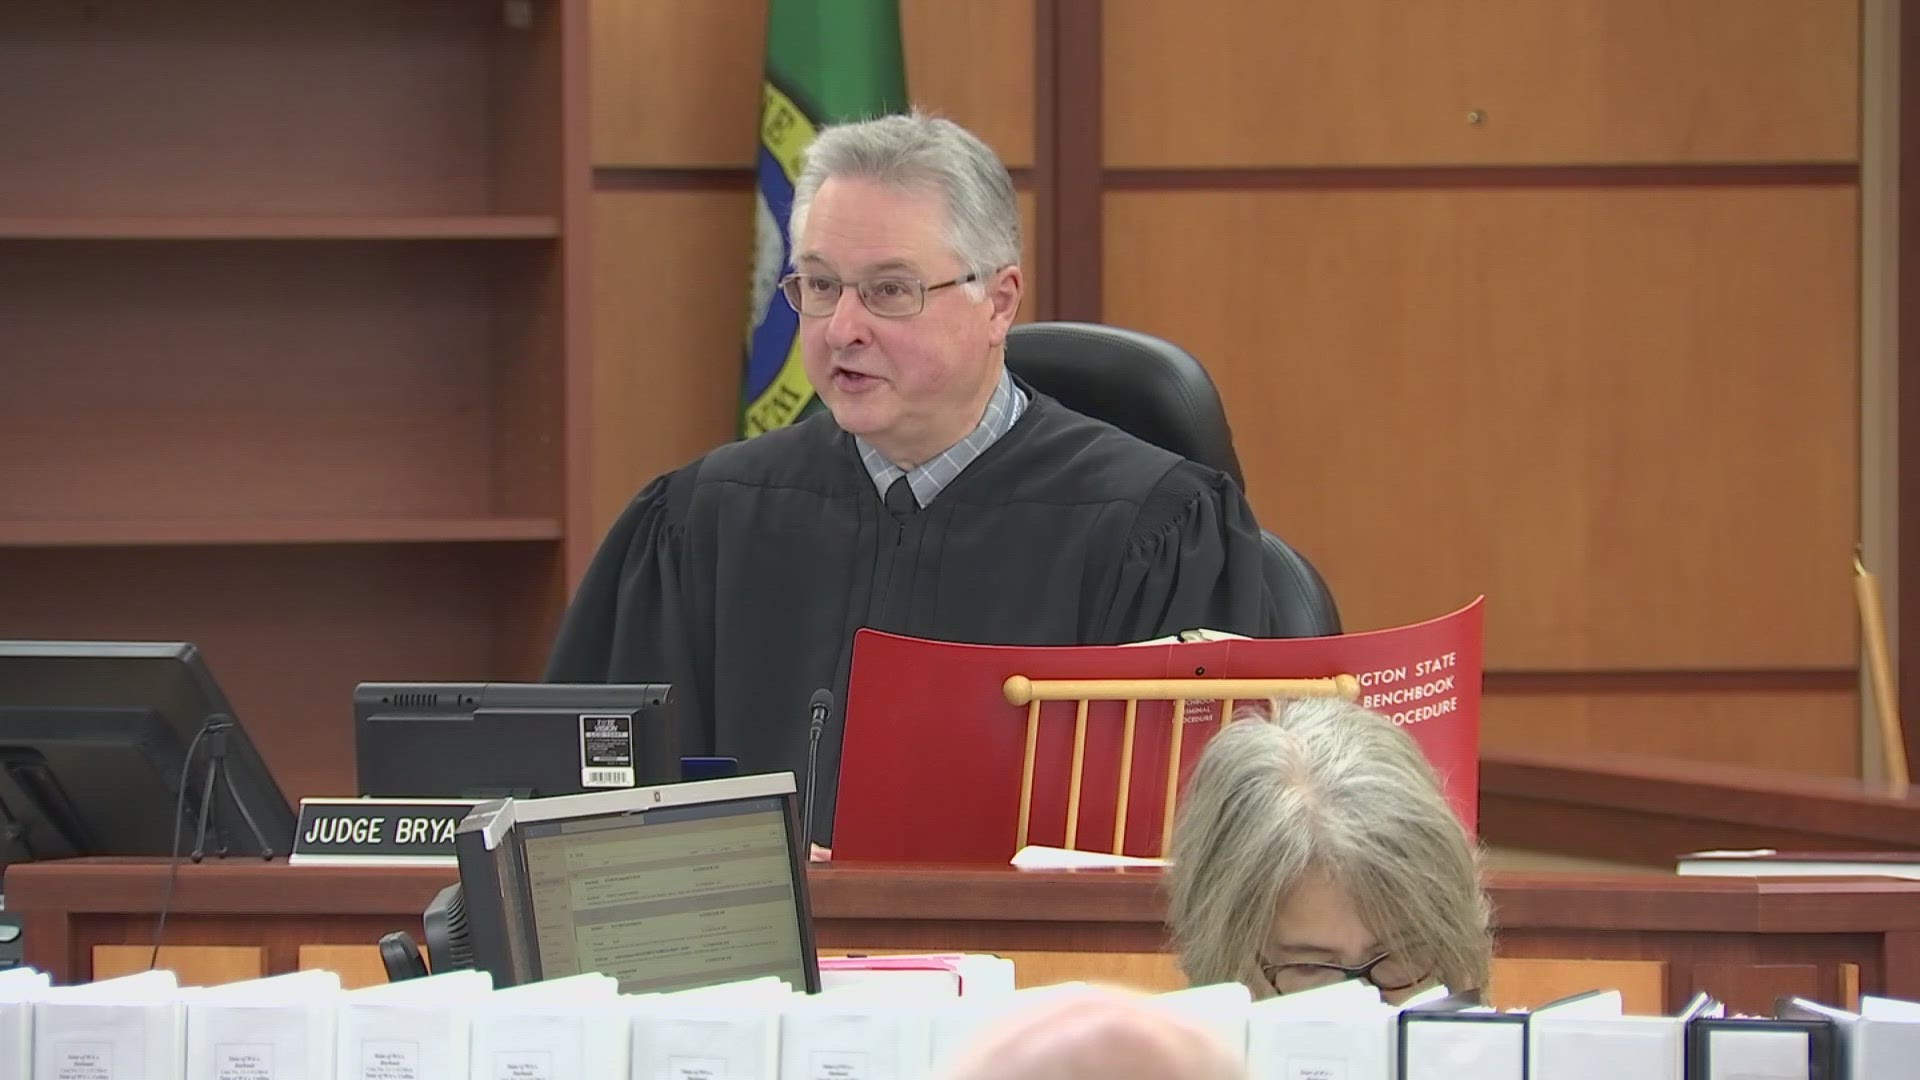 This is the second time deliberations have restarted since the case was handed to the jury last week.